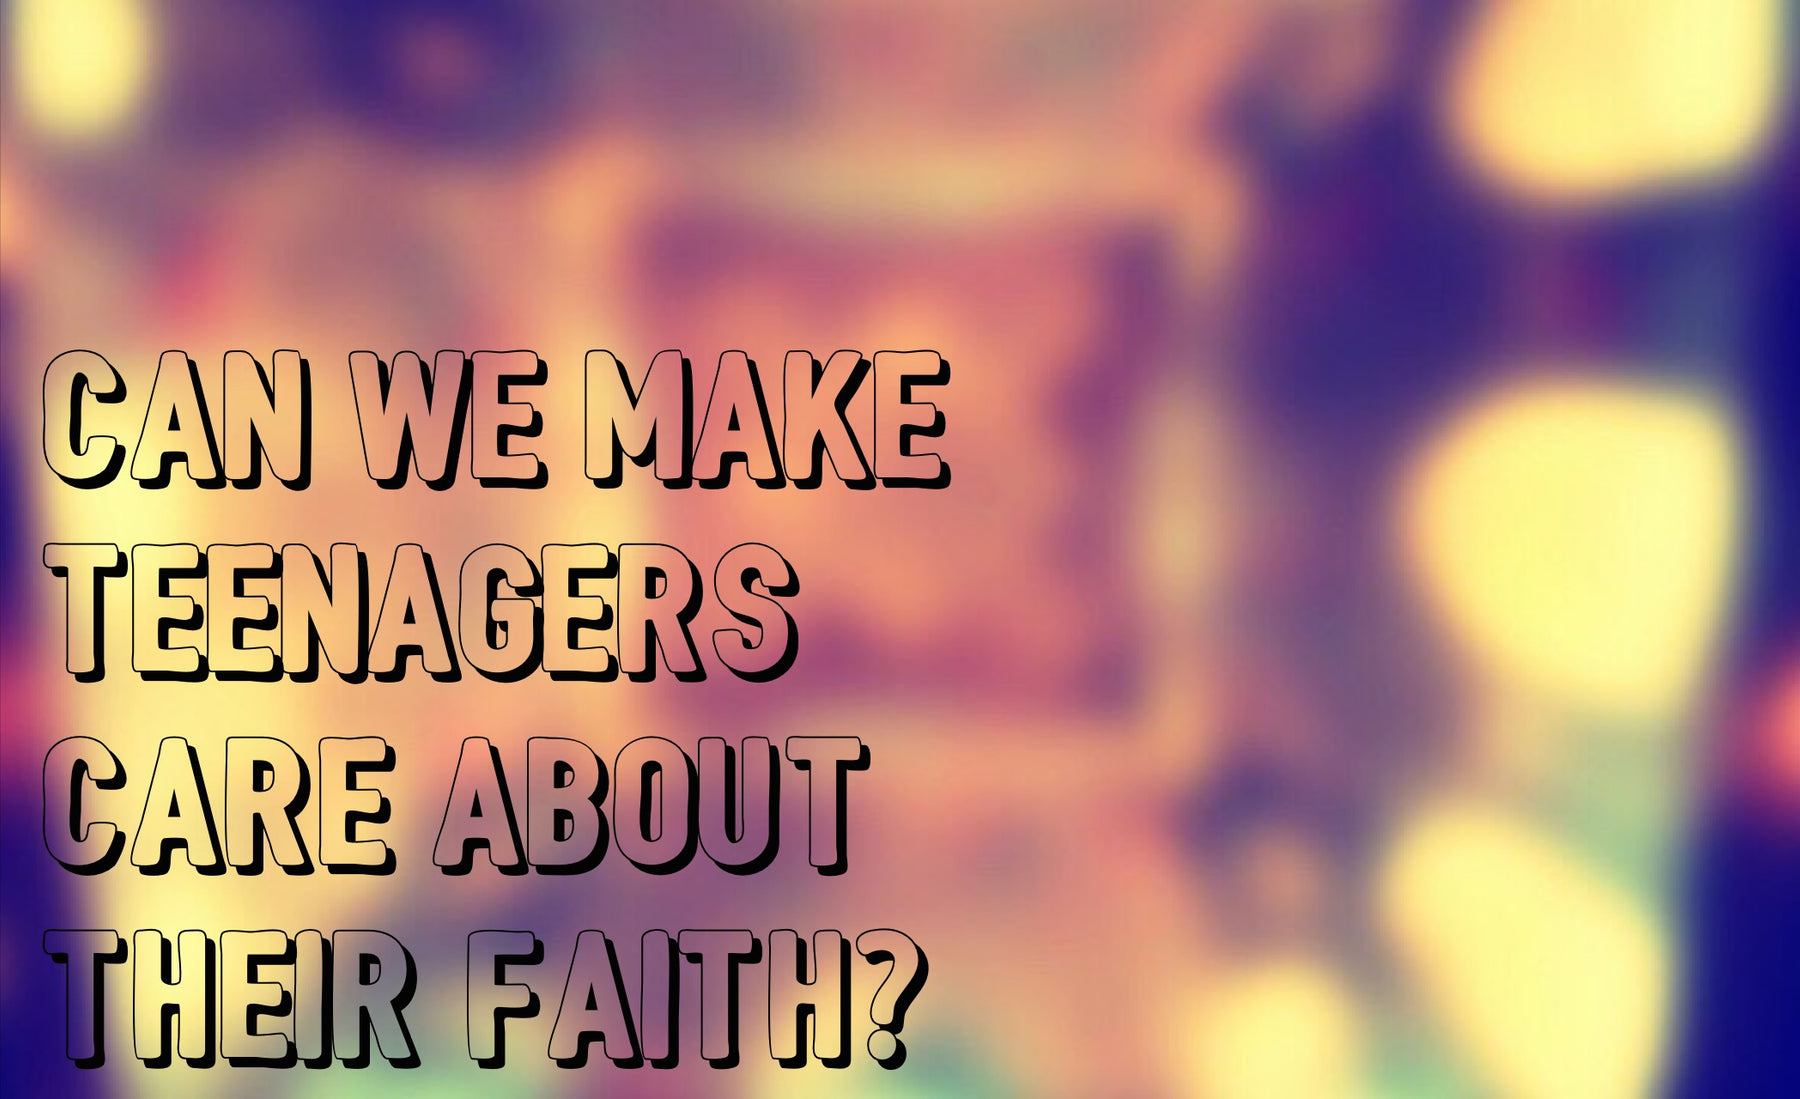 How Can We Make Teenagers Care About Their Faith?